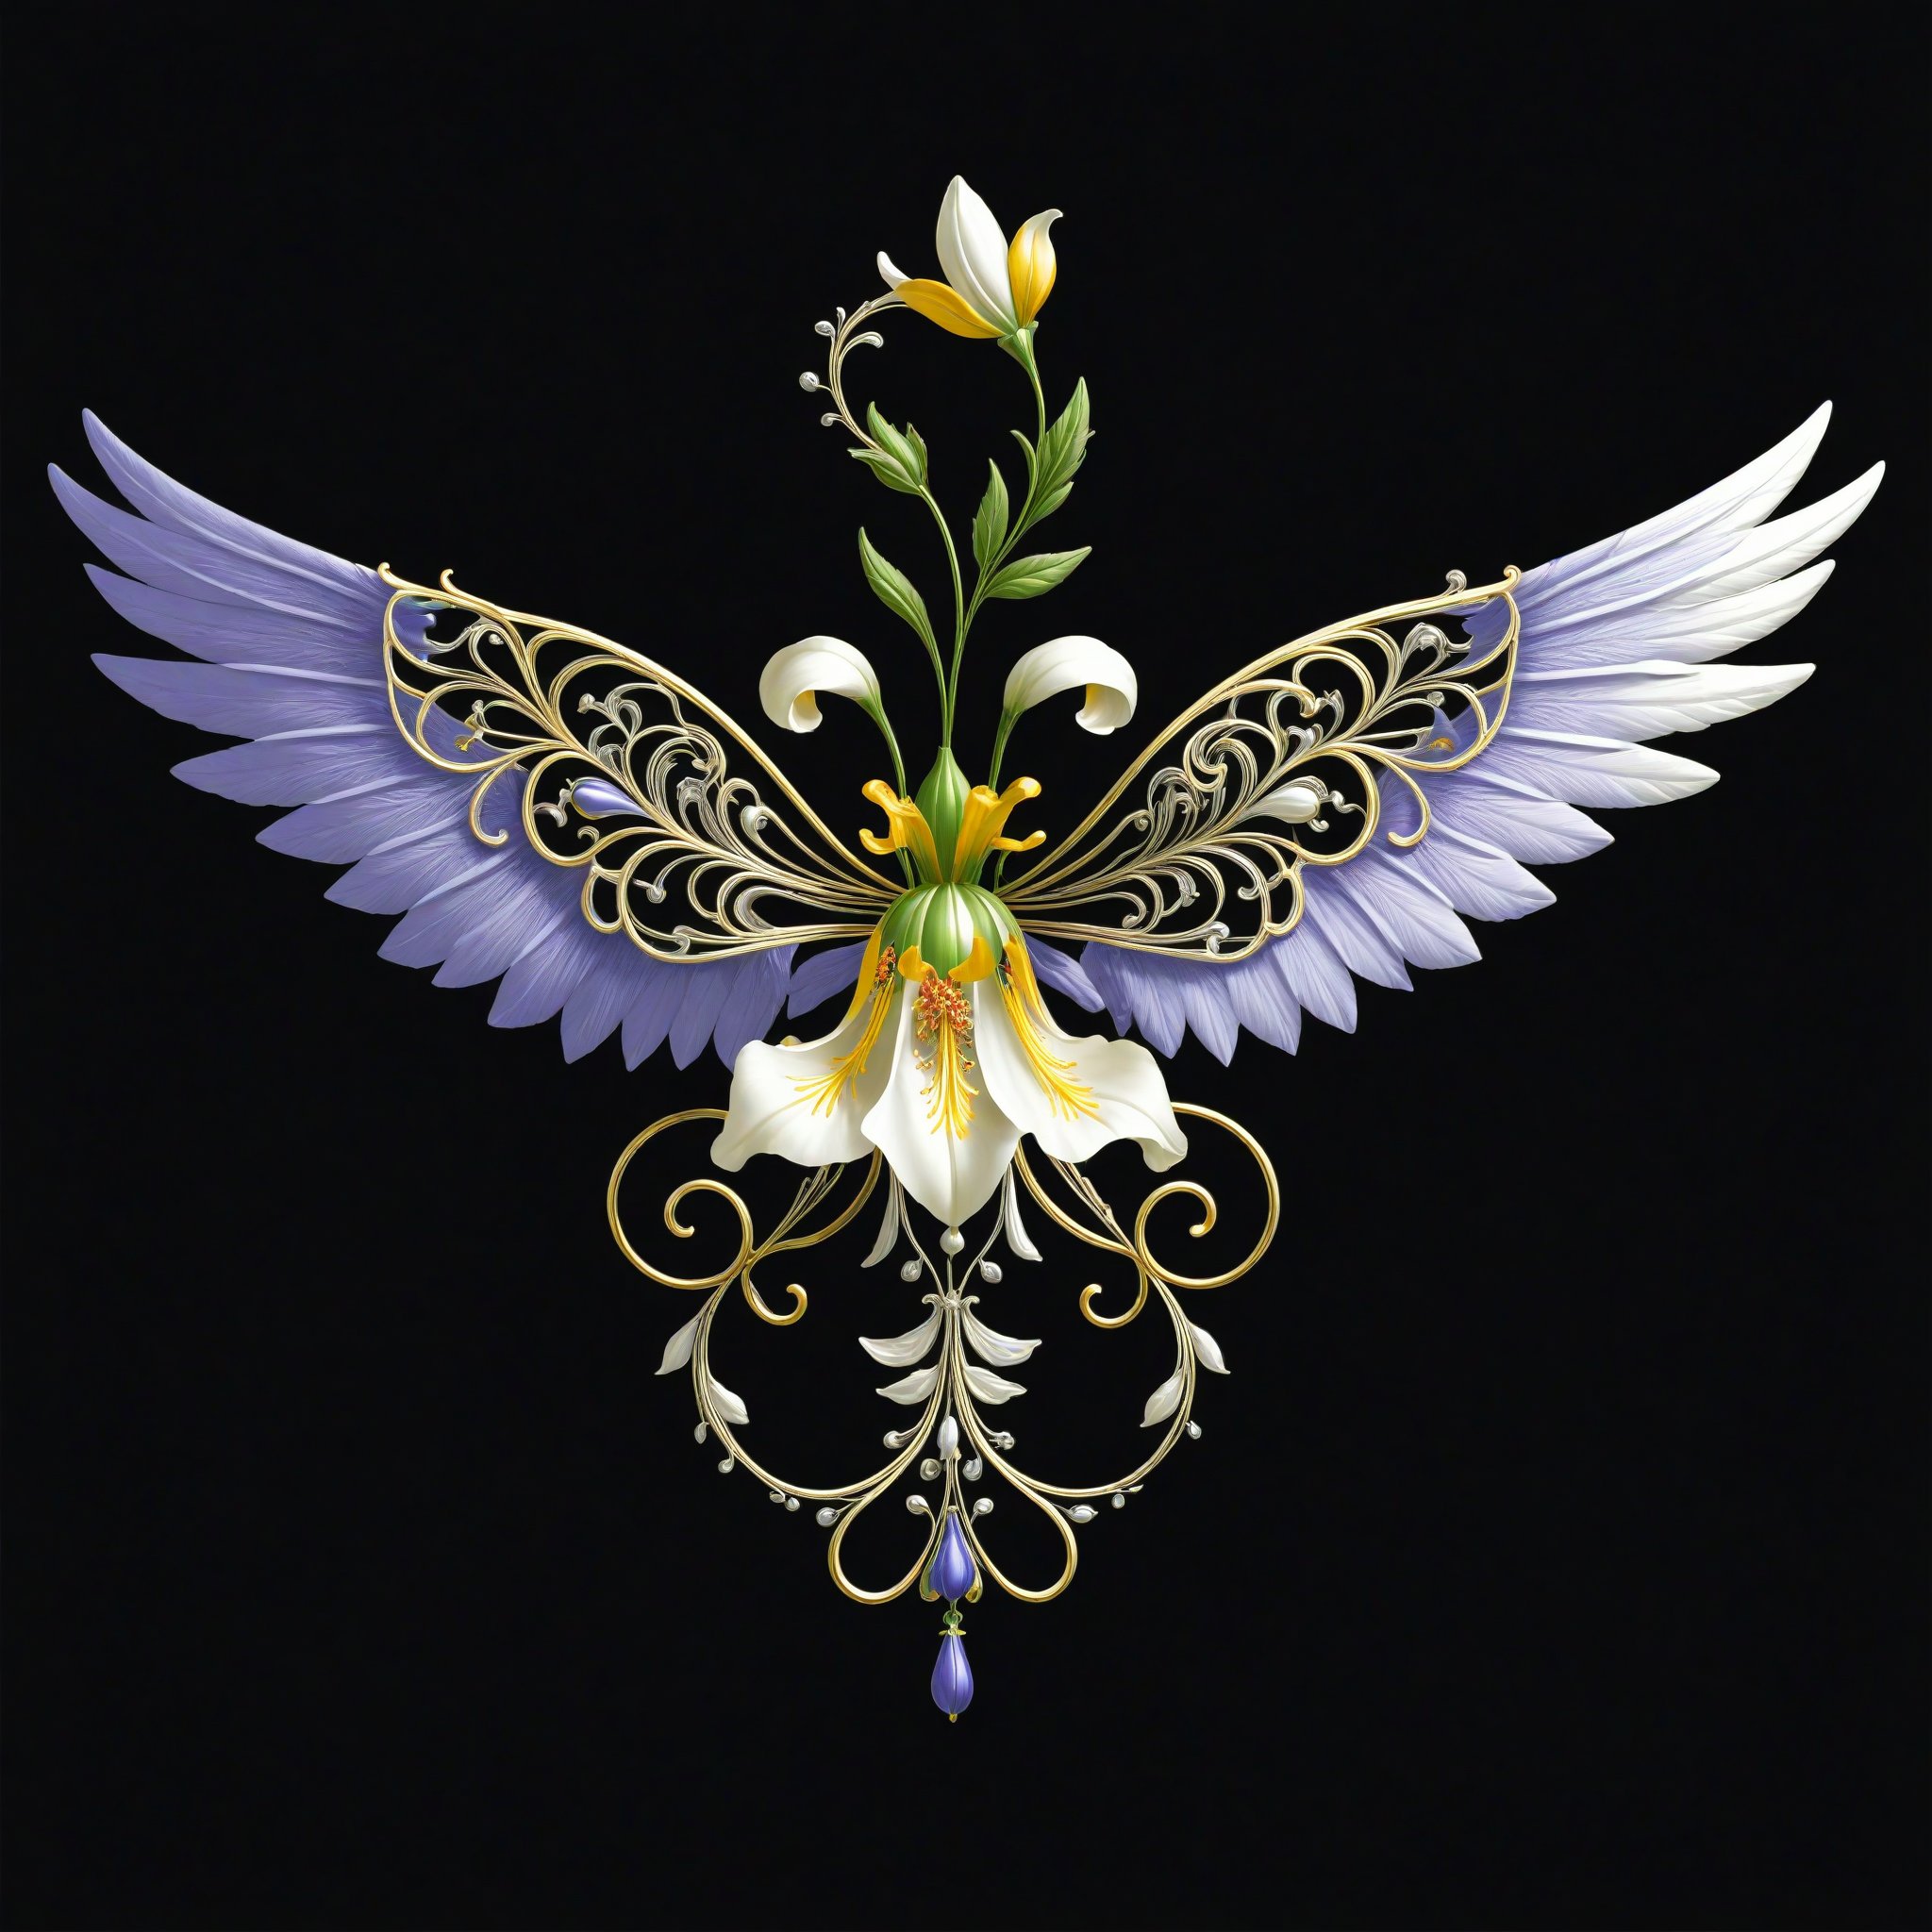 a bellflower flower whit wing majestic with clasic ornament Mechanical lines Elegance T-shirt design, BLACK BACKGROUND